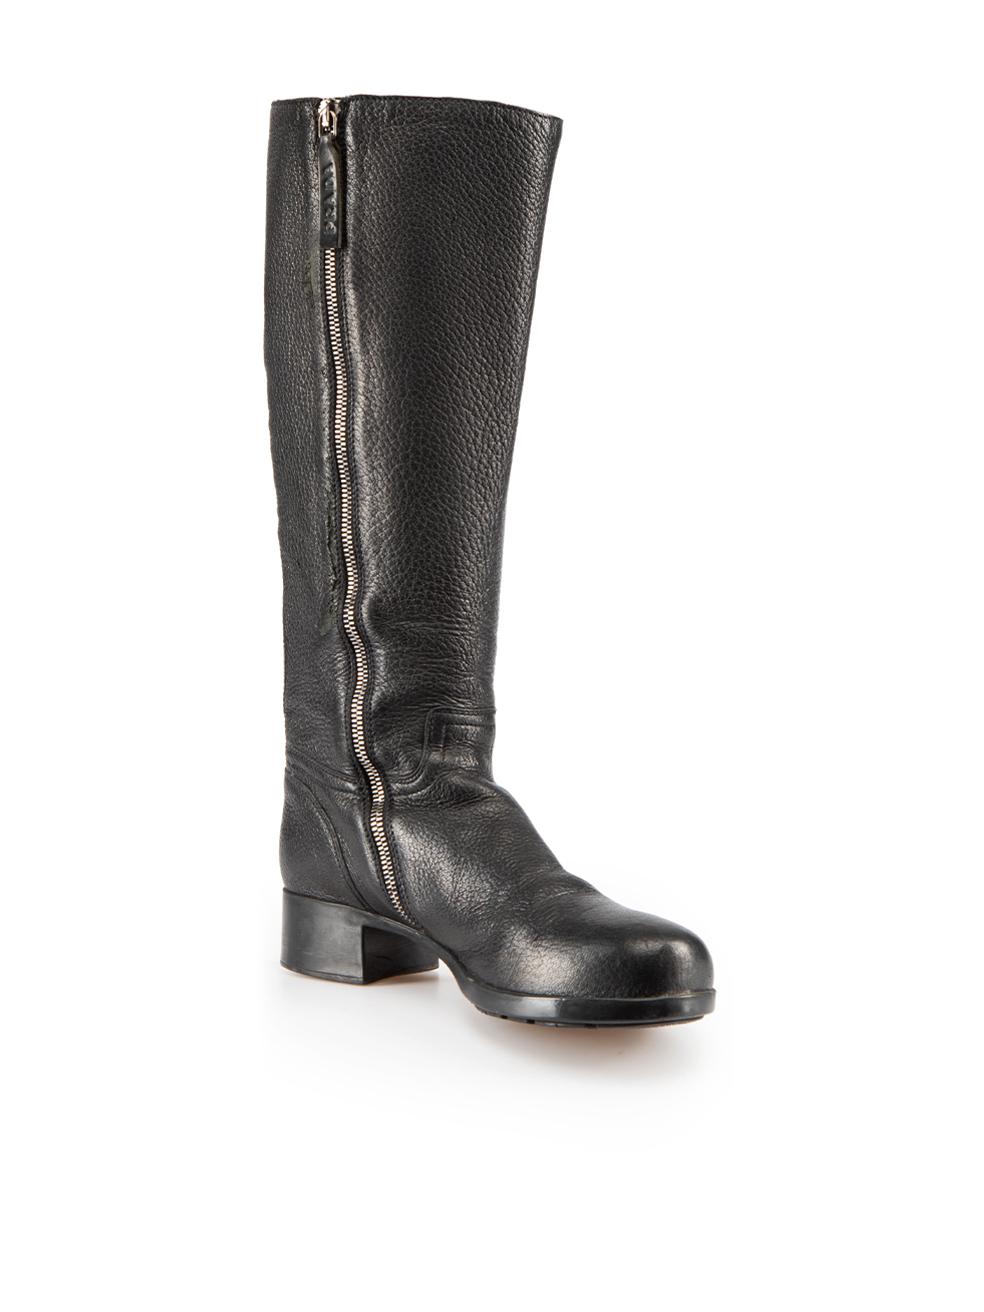 CONDITION is Good. Minor wear to boots is evident. Light scuffing to leather on toe caps and leg of boots, with minor tarnishing to hardware on this used Prada Sport designer resale item.
  
Details
Black
Leather
Boots
Knee high
Mid heel
Round